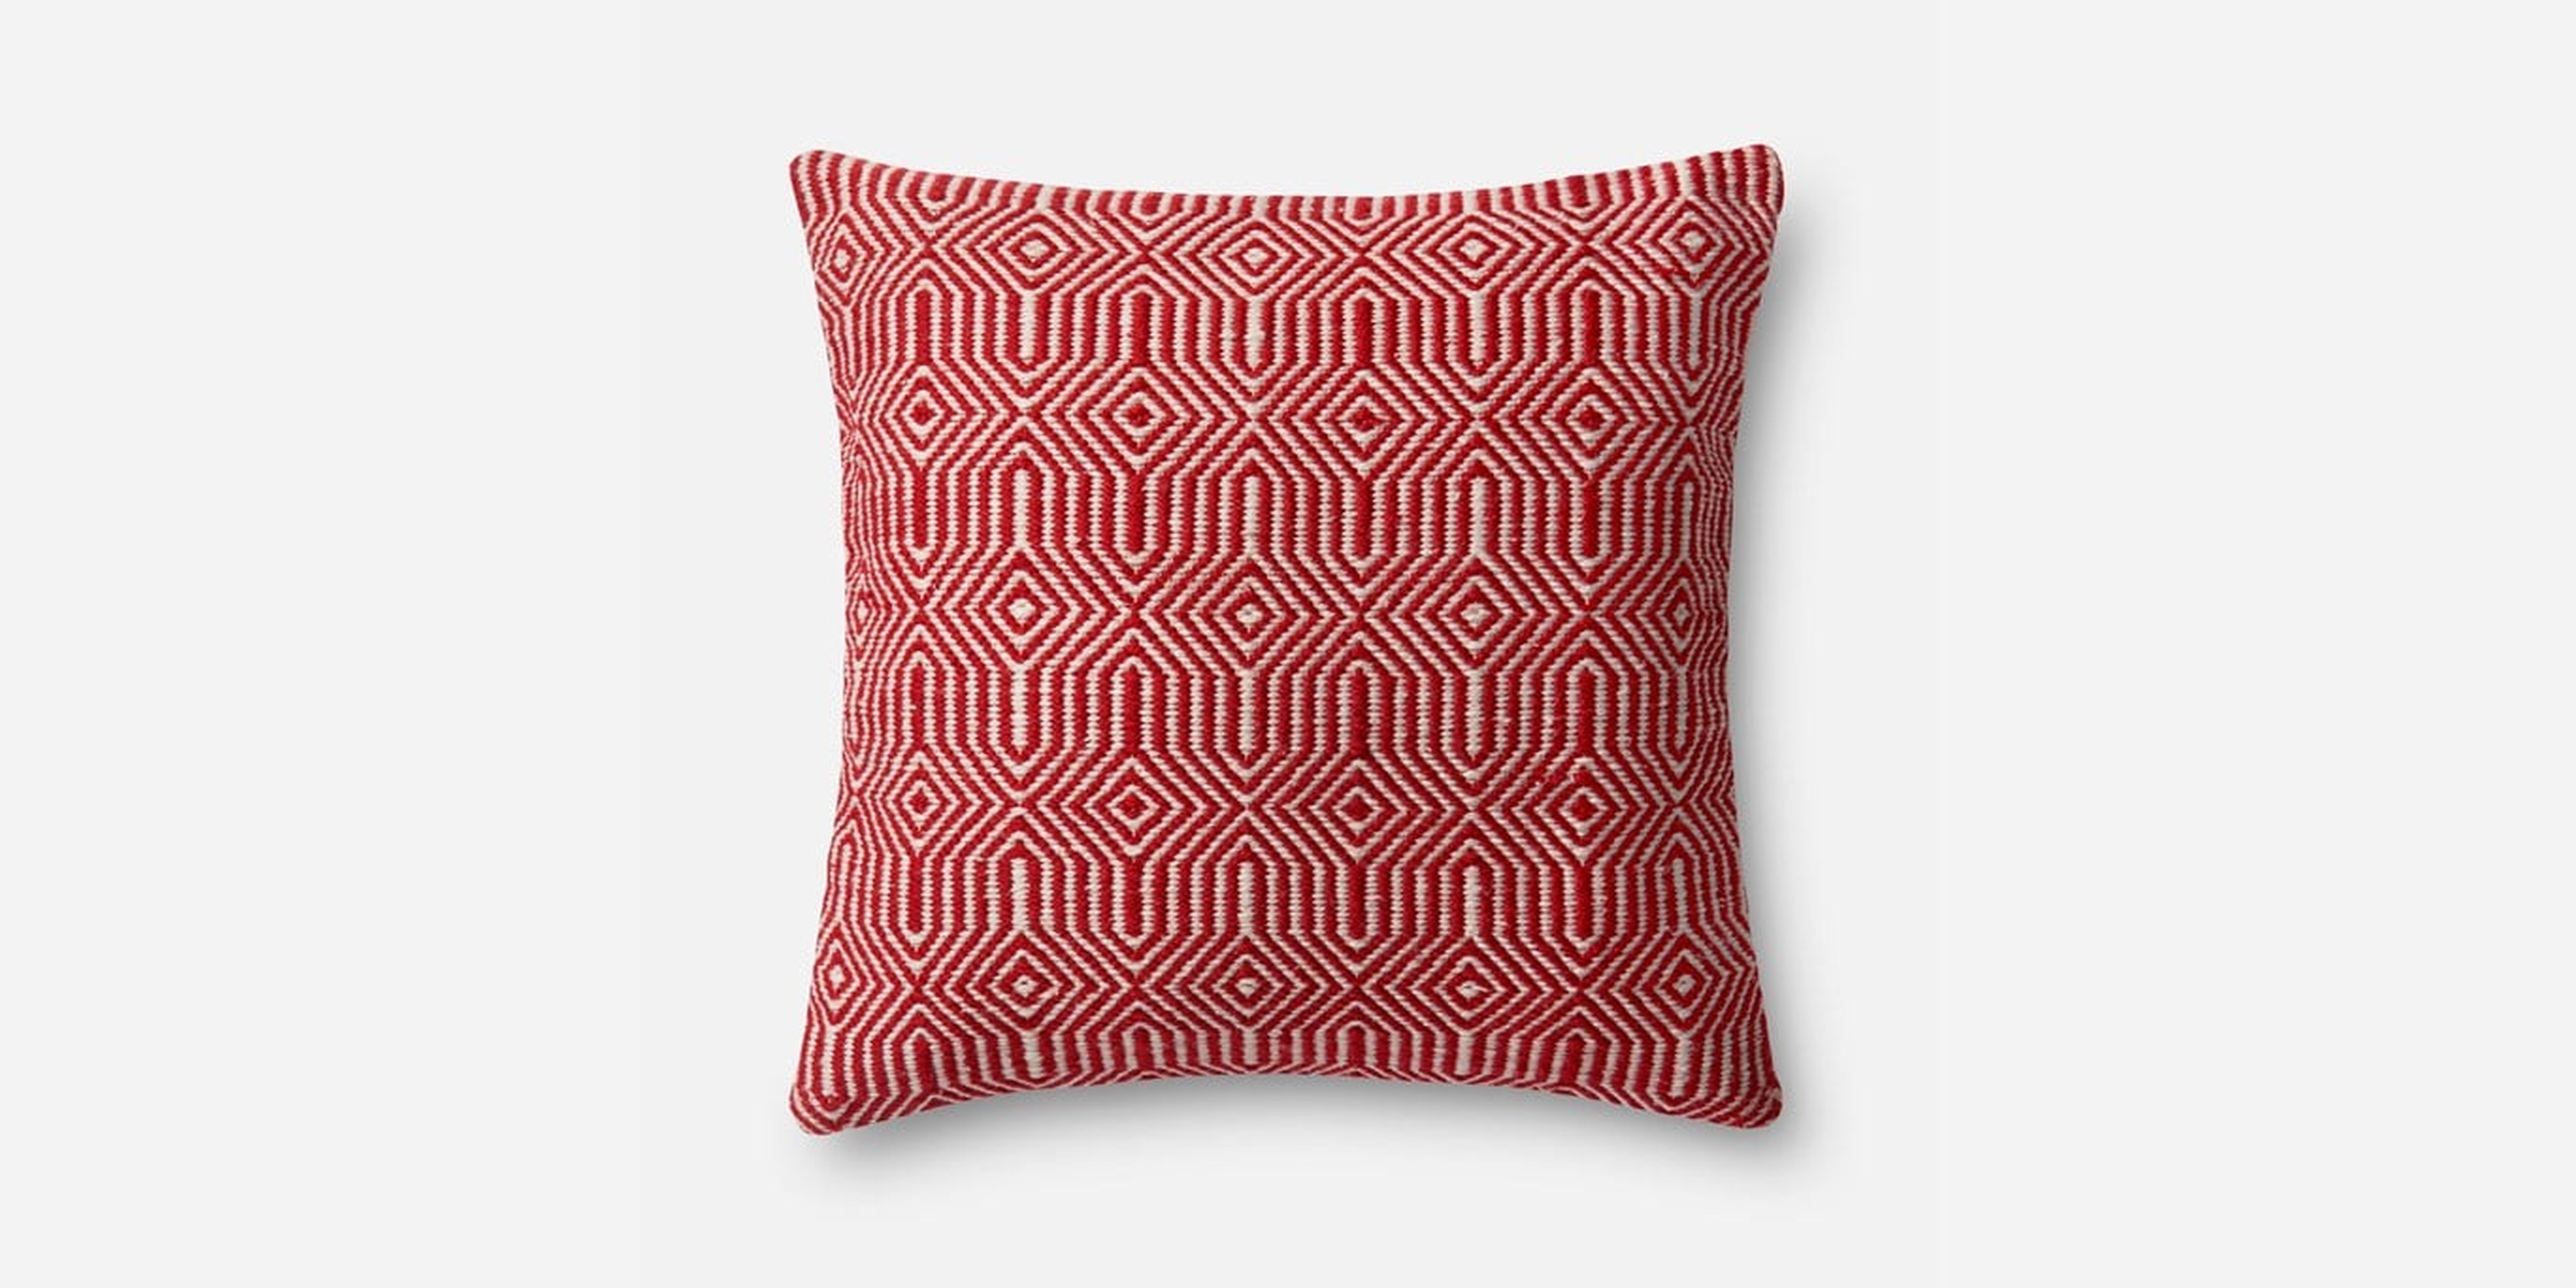 Loloi Pillows P0339 Red / Ivory 22" x 22" Cover w/Poly - Loloi Rugs